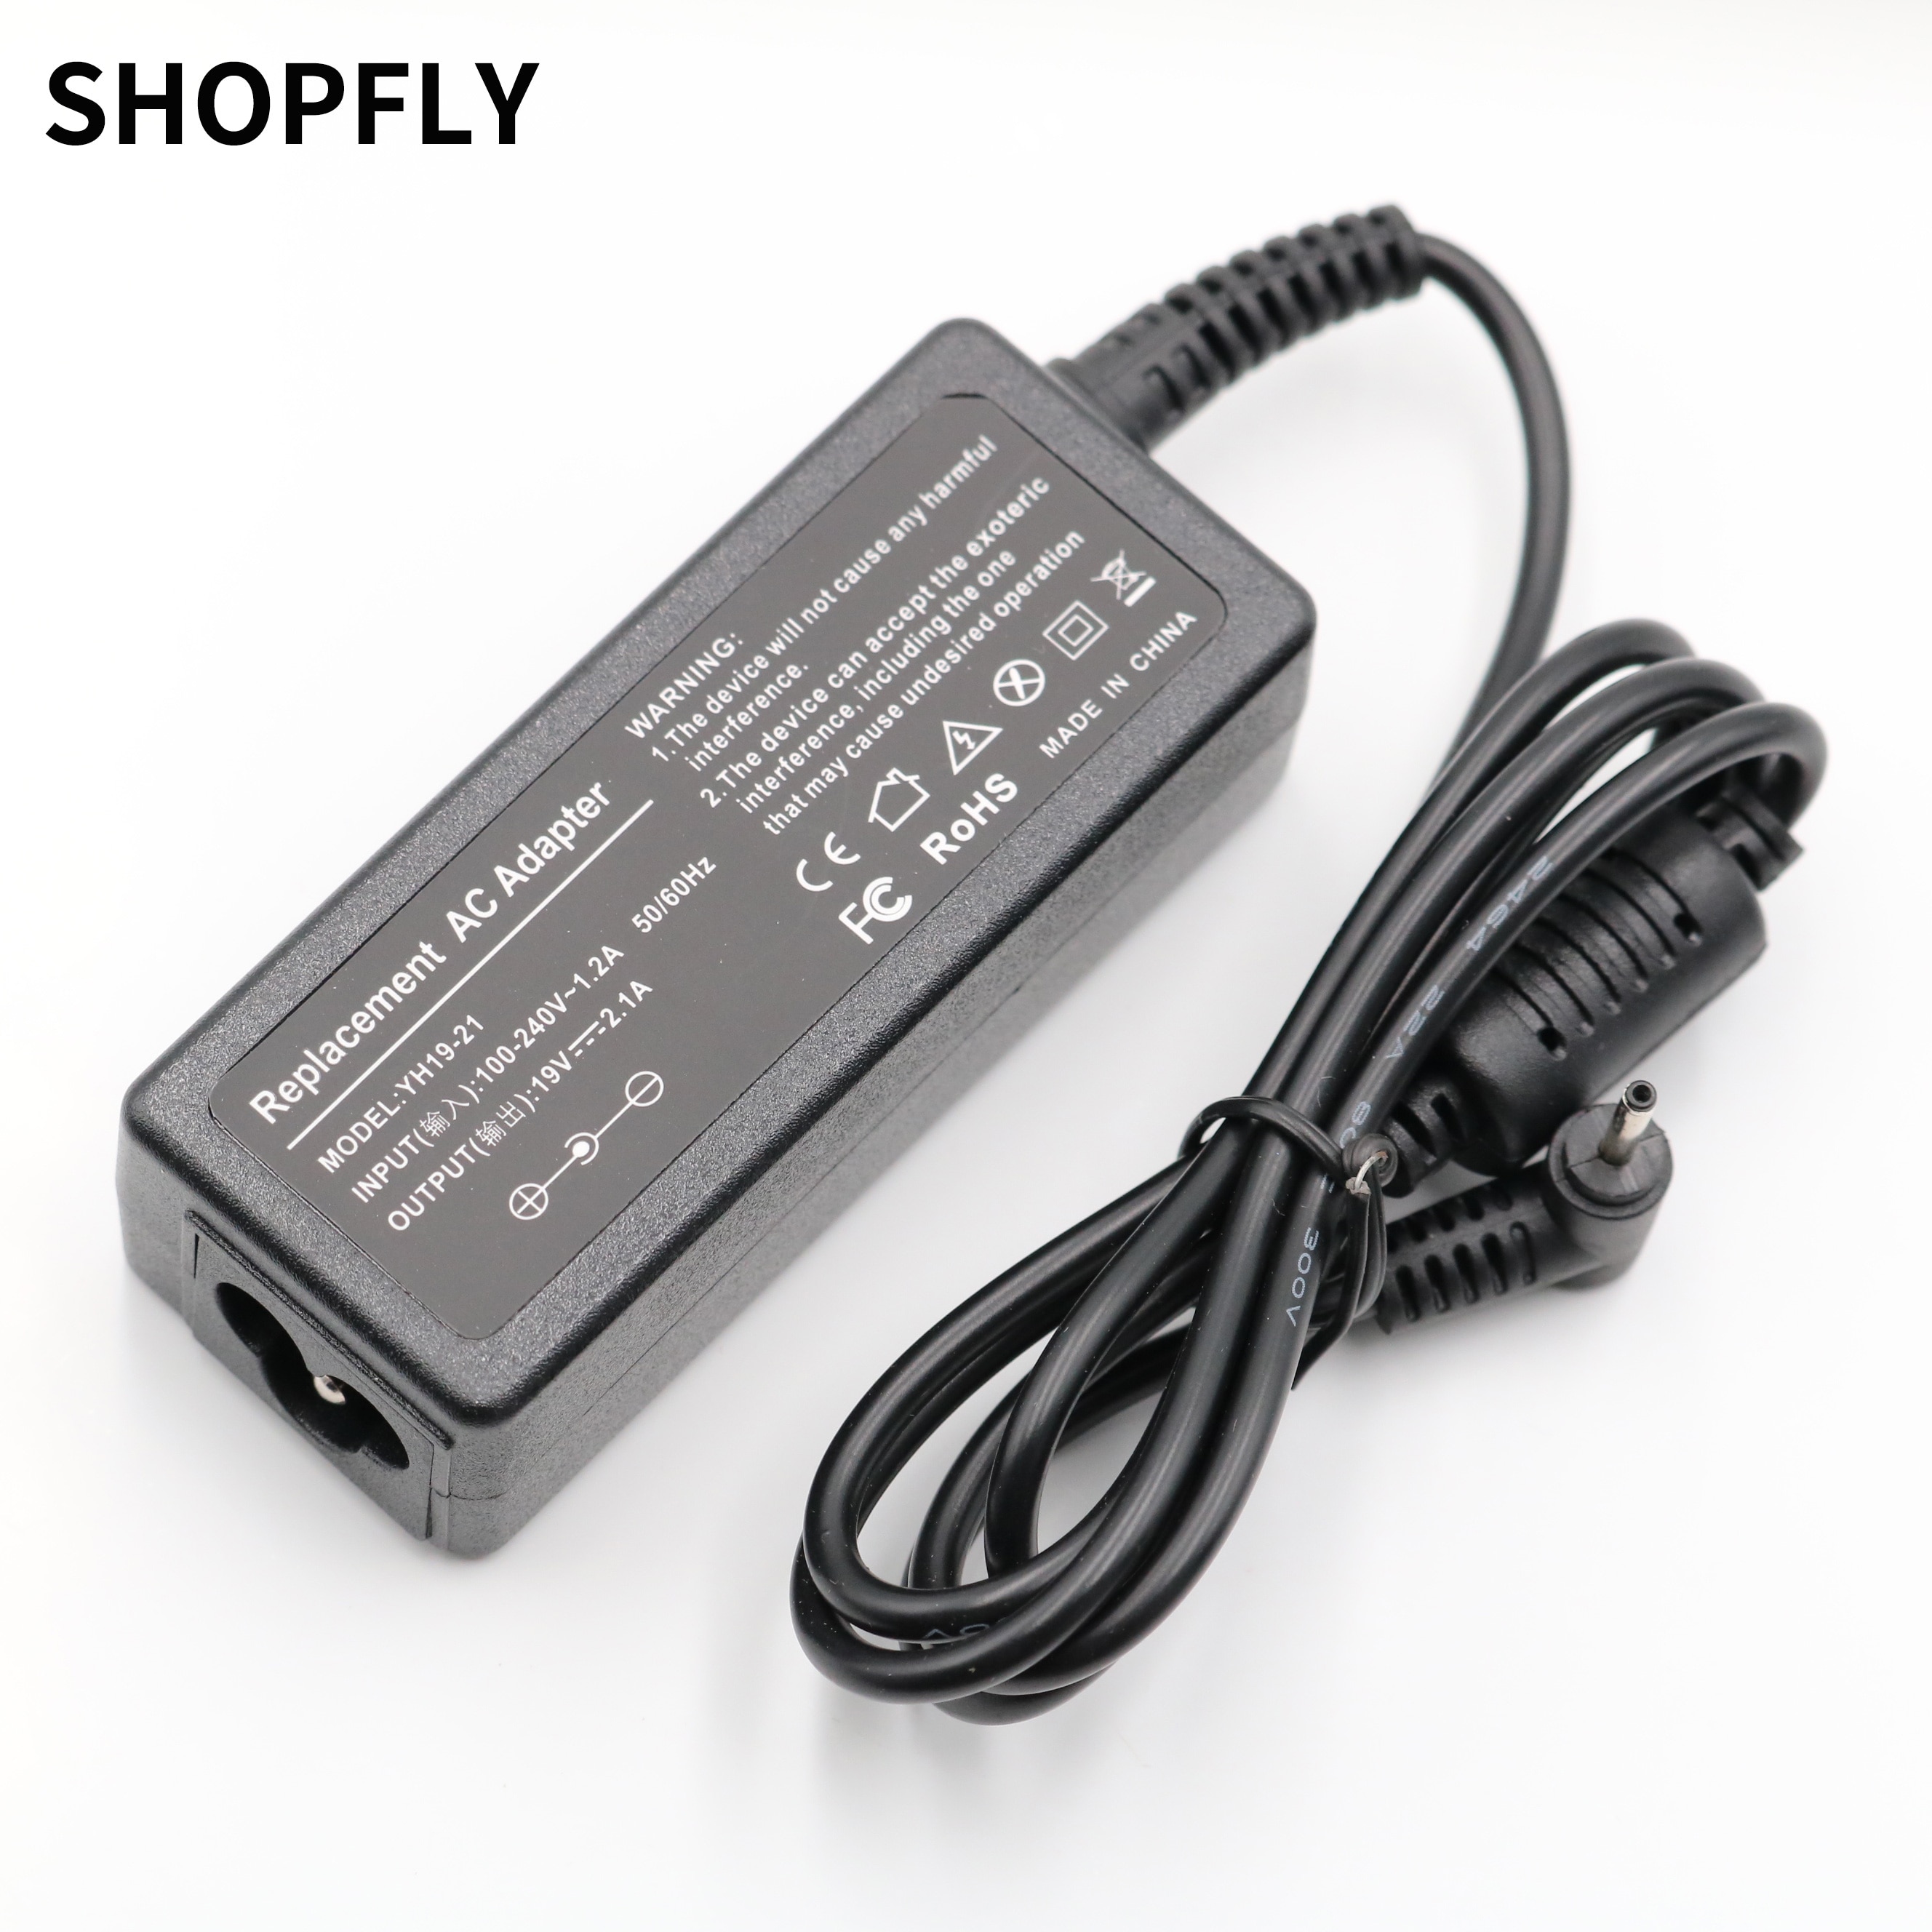 19V 2.1A Voor Asus Eee Pc Seashell 1225B 1225C 1015PED 1015T 1015B 1005HE E305895 Laptop Netbook Ac Adapter voeding Lader